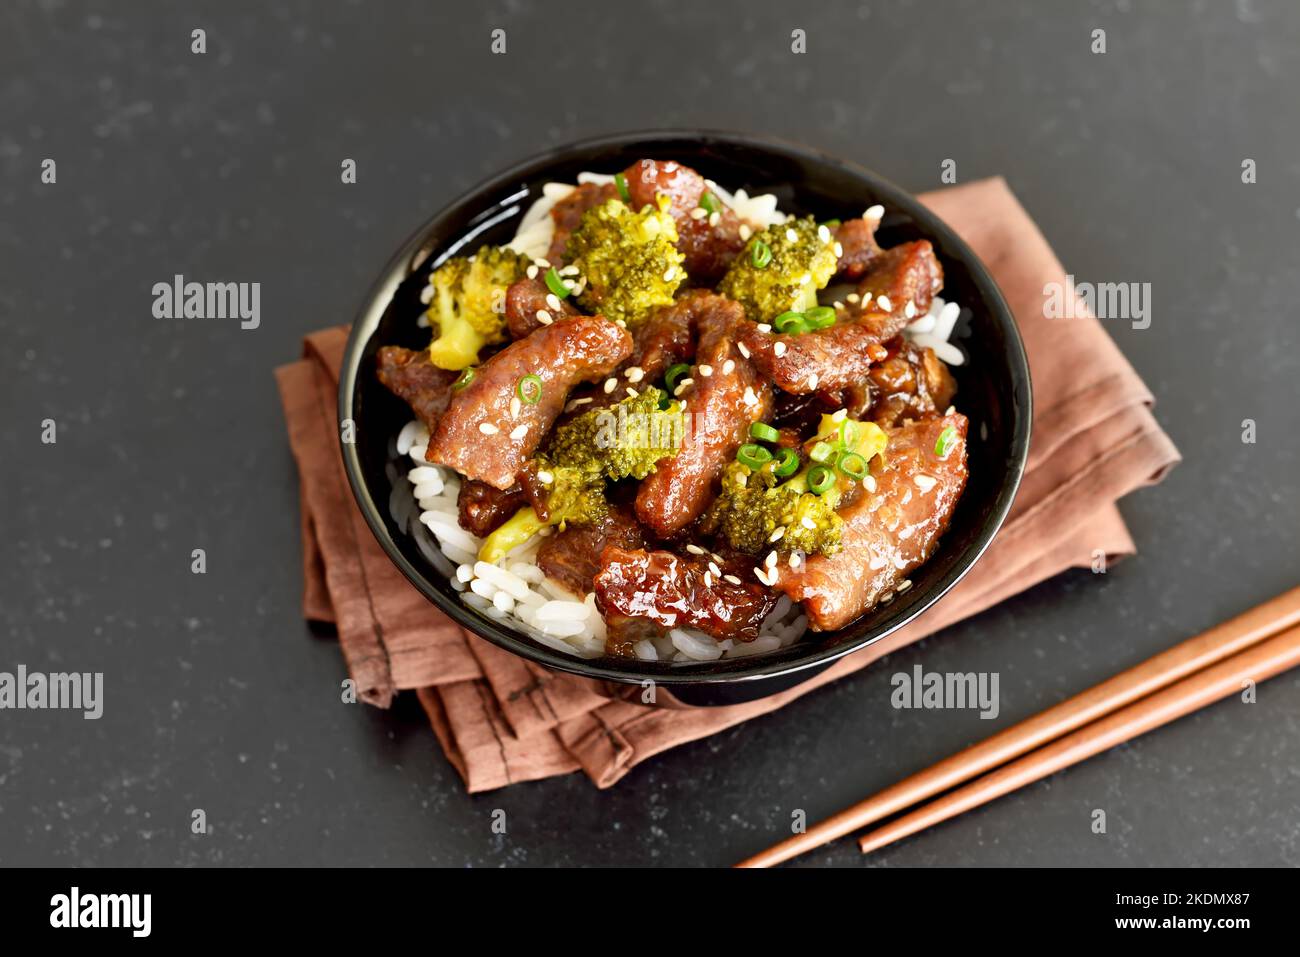 Beef and broccoli stir fry with rice in bowl Stock Photo